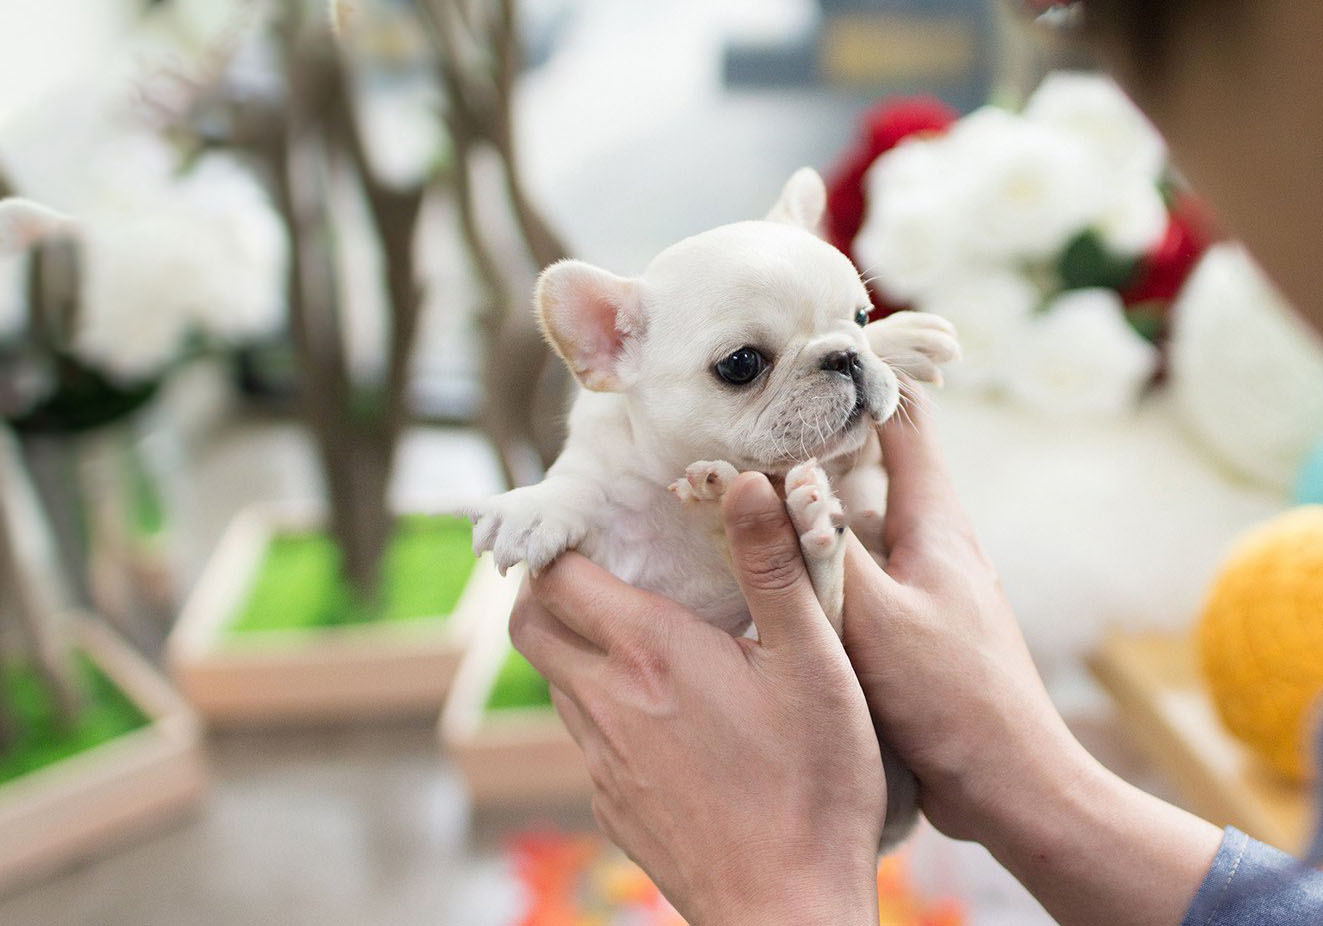 Molly Teacup French Bulldog for Sale